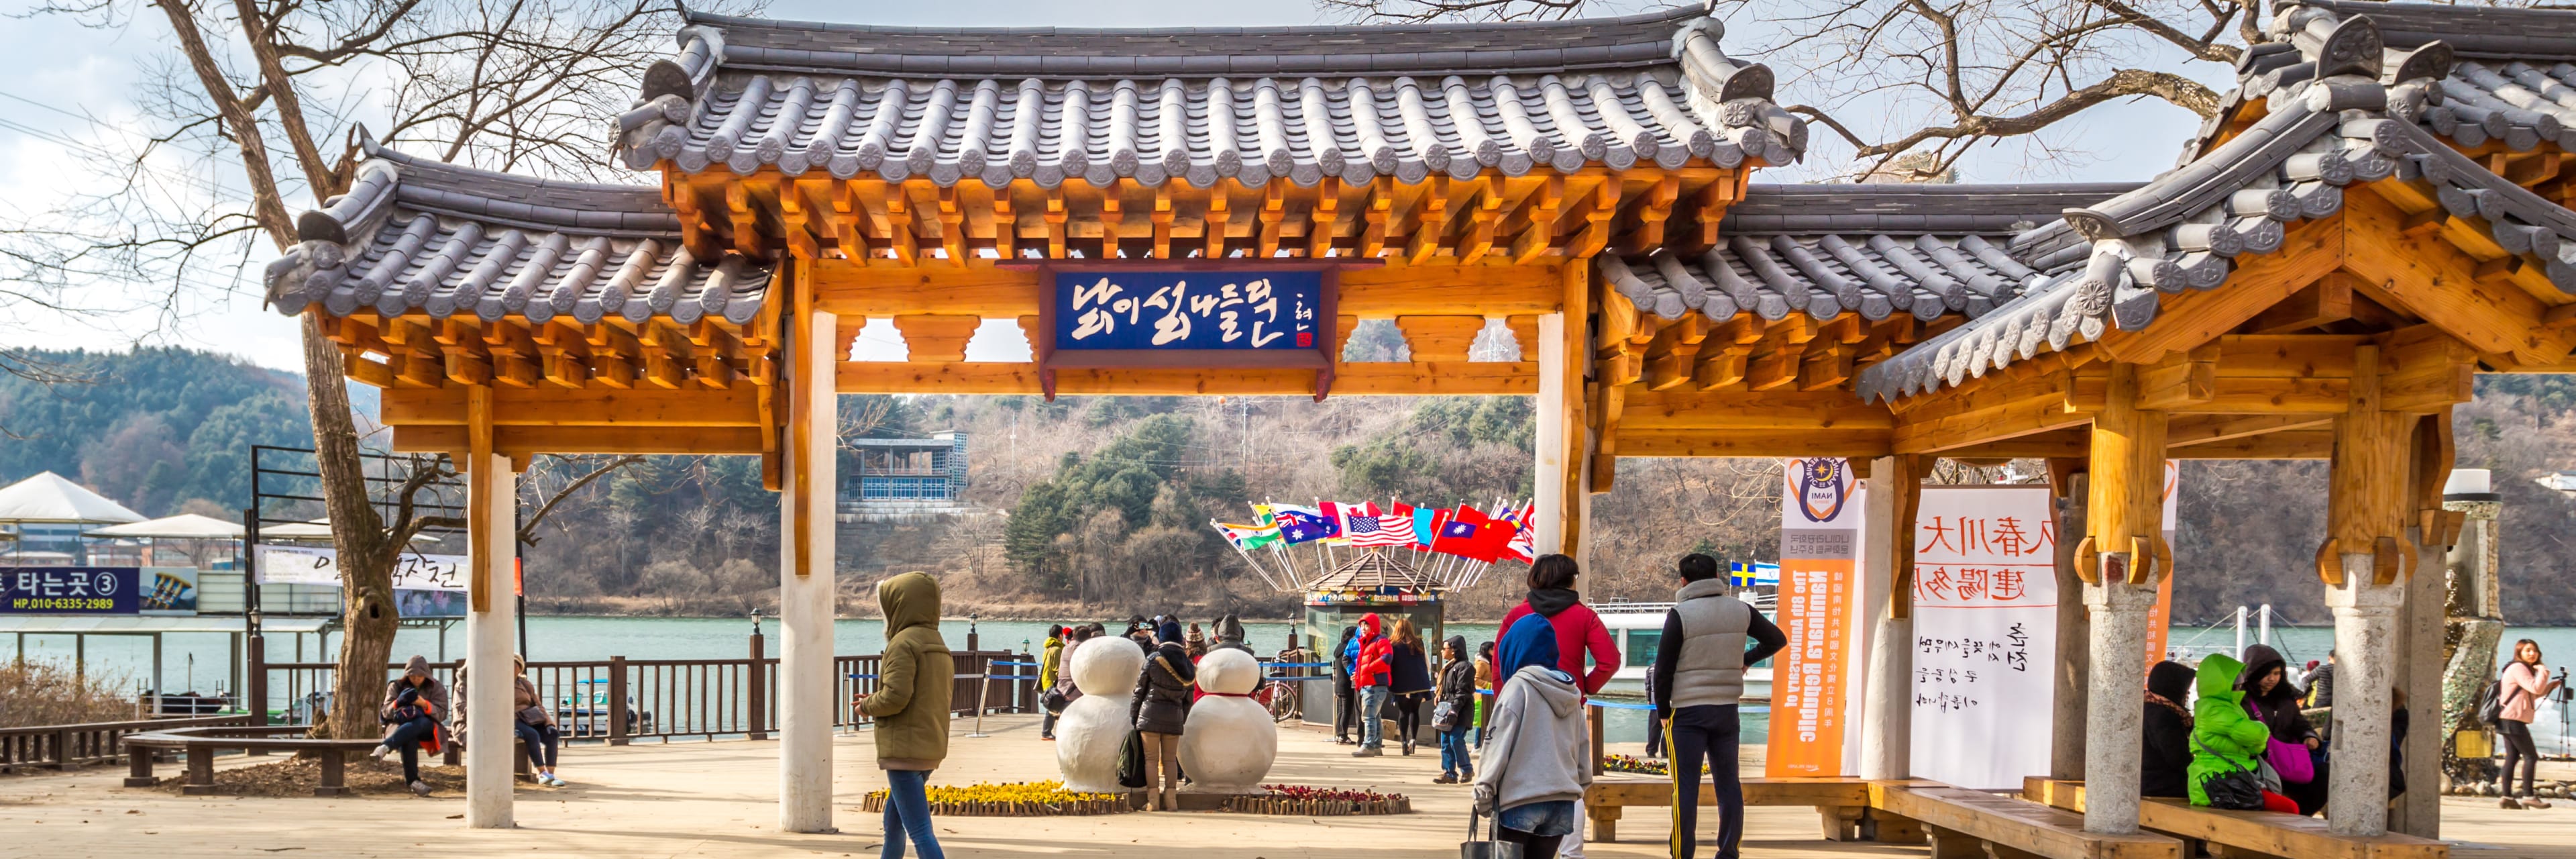 Discover Seoul's best attractions pass by Go City - Free entry into Nami Island via Shuttle Bus